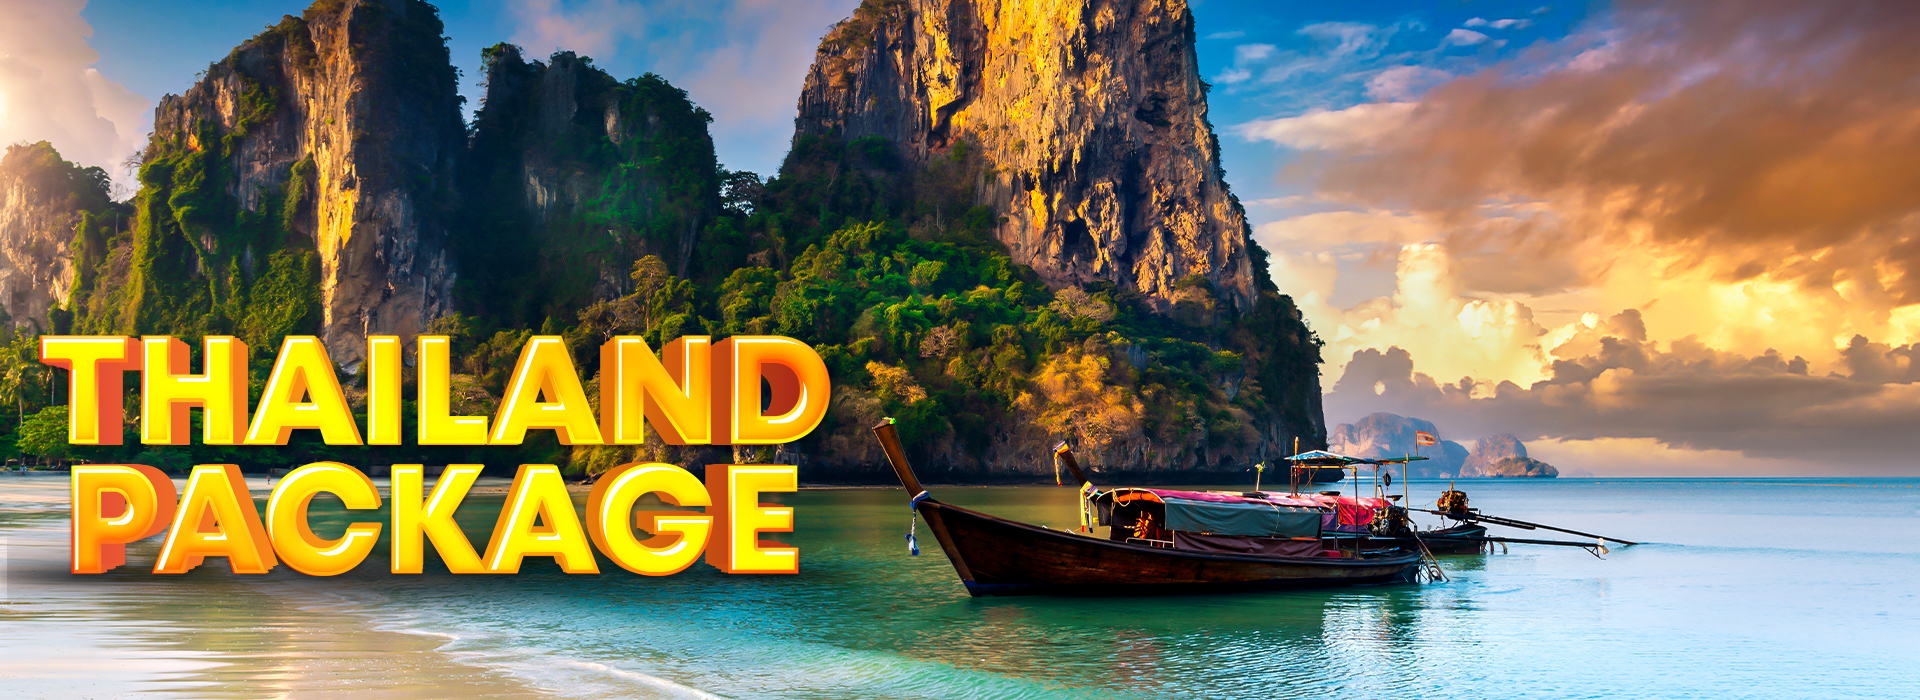 thailand packages banner